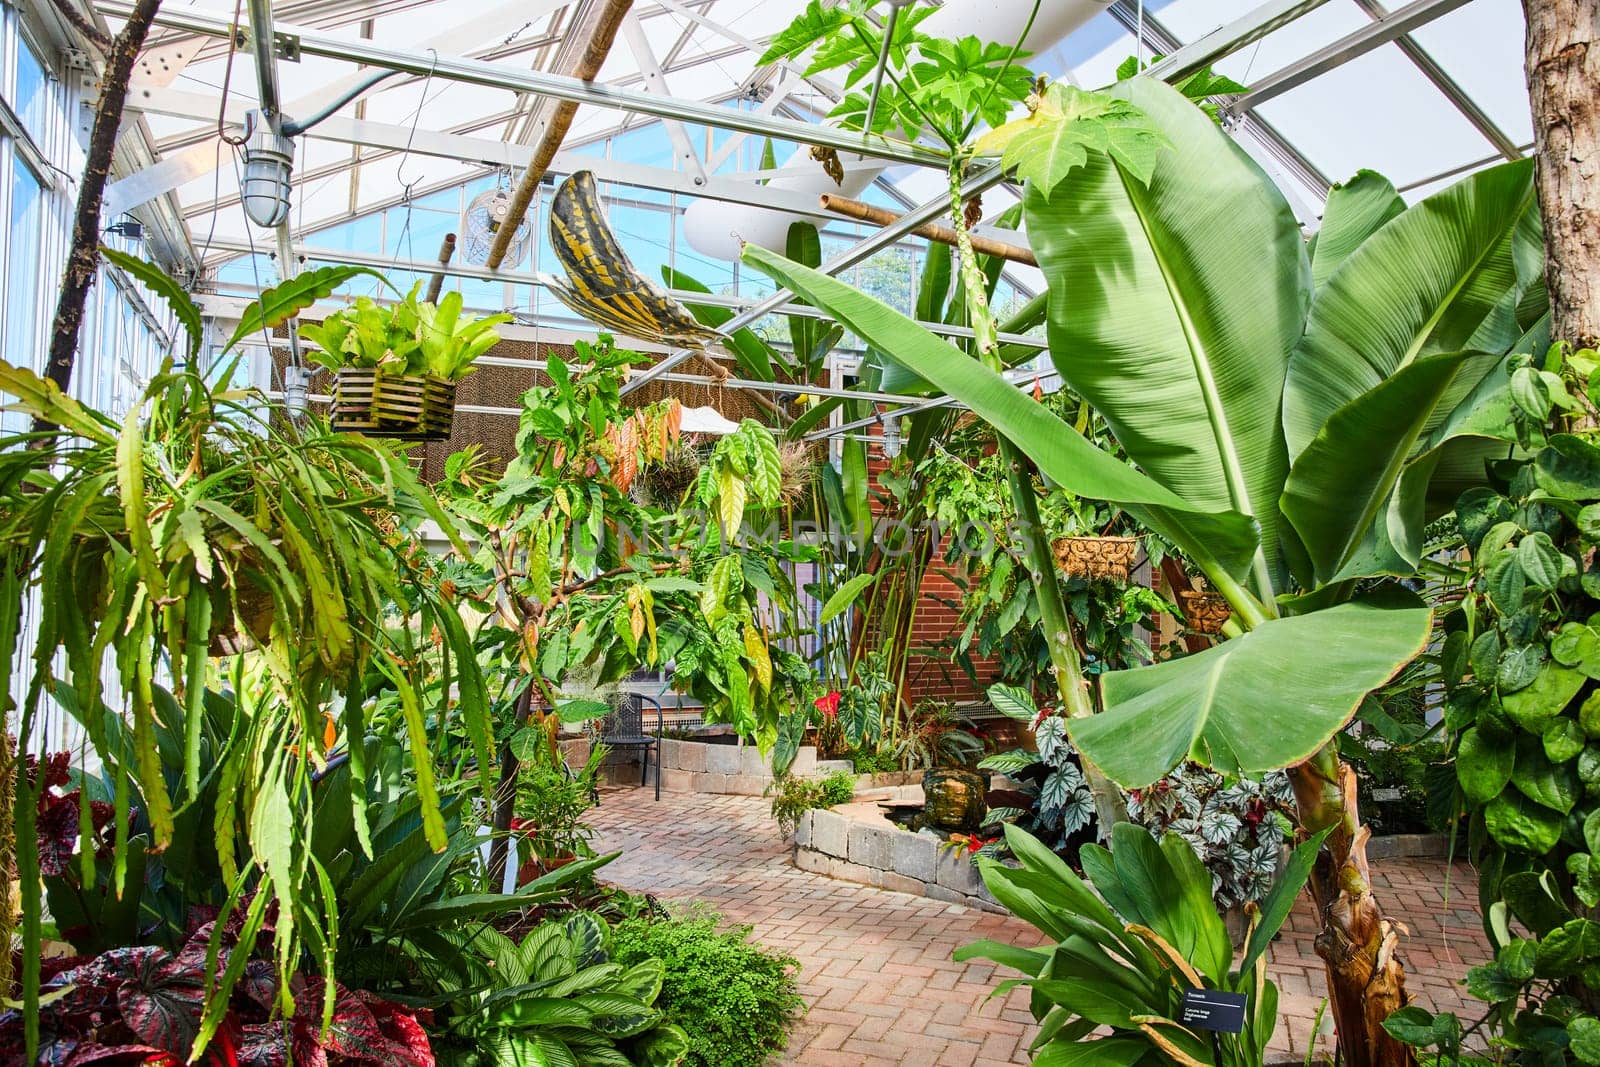 Lush Greenhouse Interior in Muncie, Indiana, 2023 - A Tranquil Paradise of Tropical Plants under Glass Roof